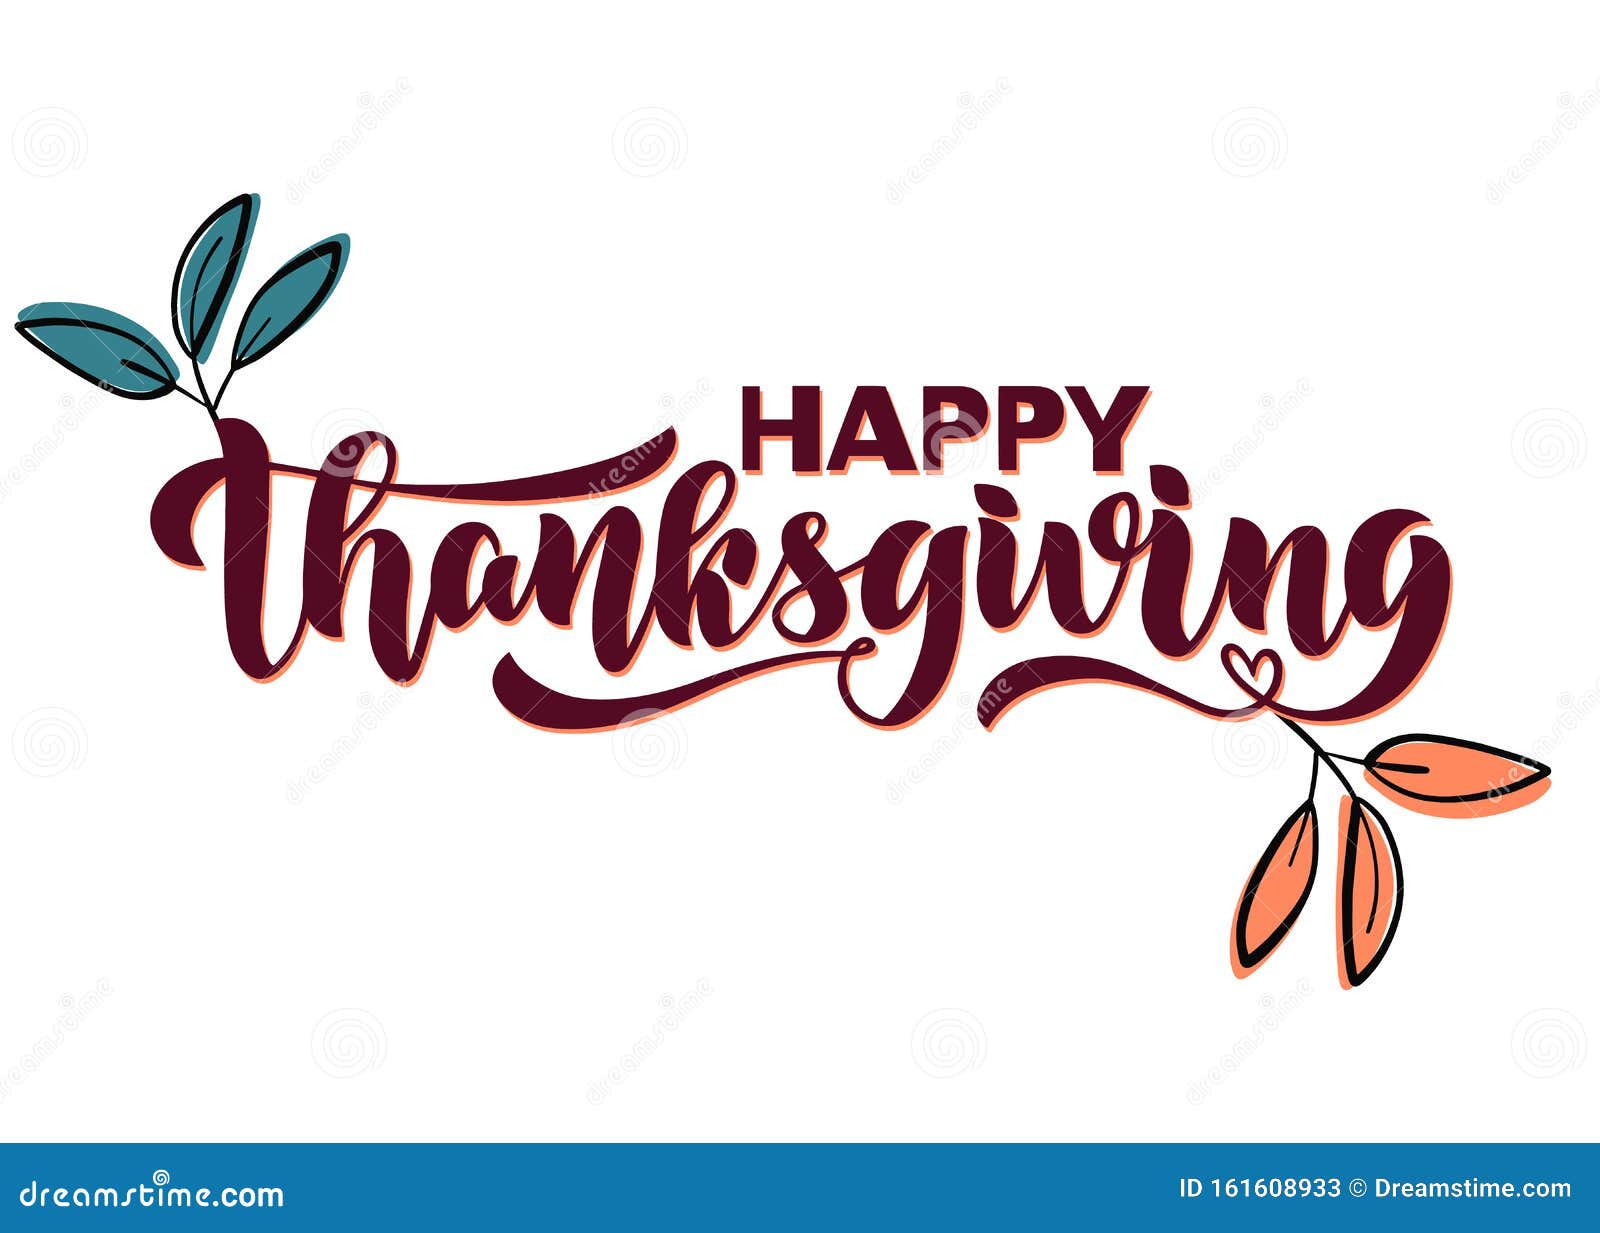 Simple Minimalistic Banner Saying Happy Thanksgiving With Teal And